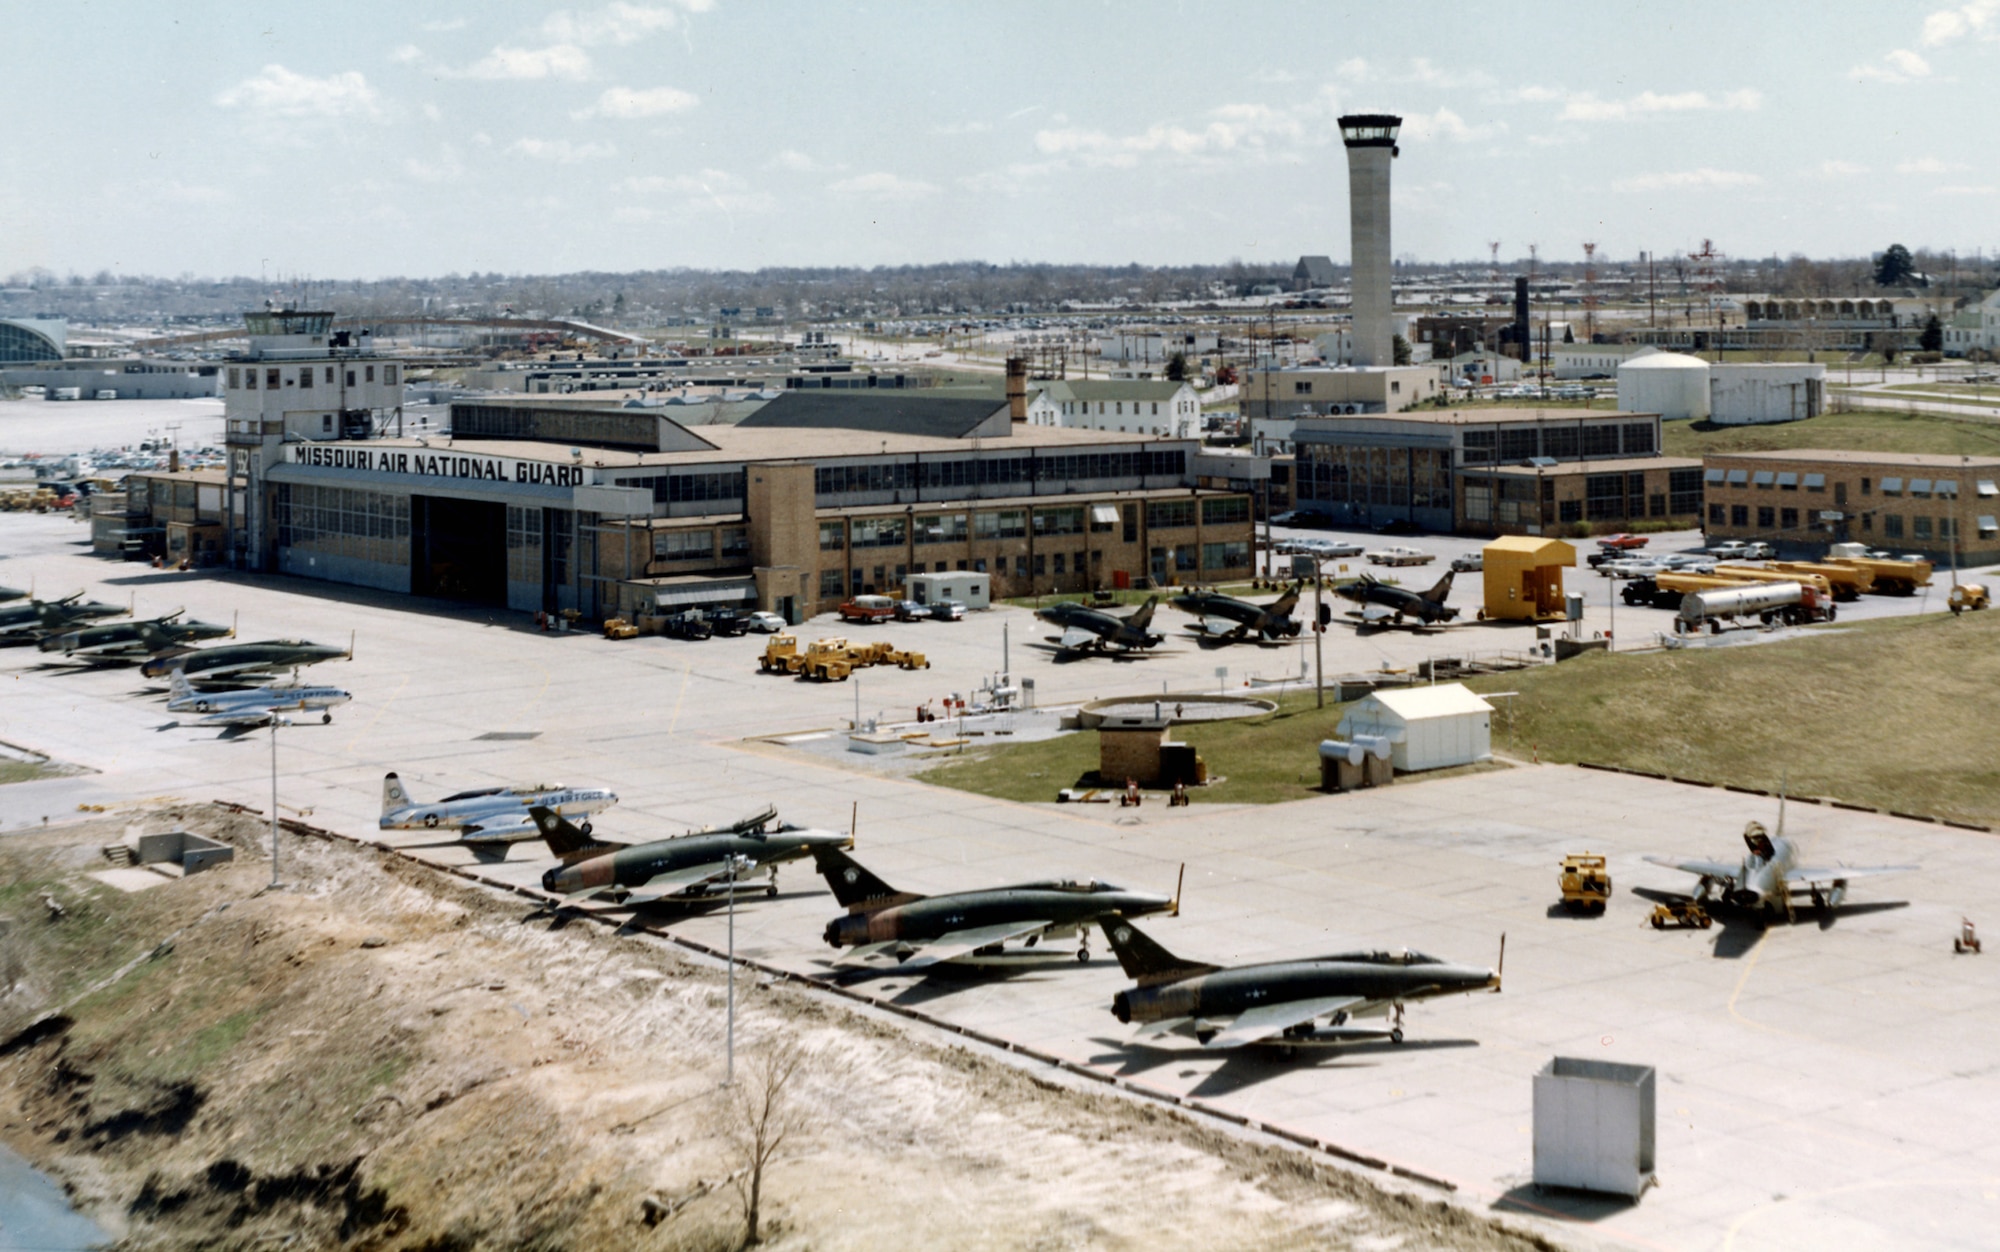 Republic F-84F “Thunderstreaks” and North American F-100C “Super Sabres” of the 131st Light Bombardment Wing, Missouri Air National Guard,  parked at Robertson Field, Saint Louis, 1962.  (131st Bomb Wing file photo/RELEASED)